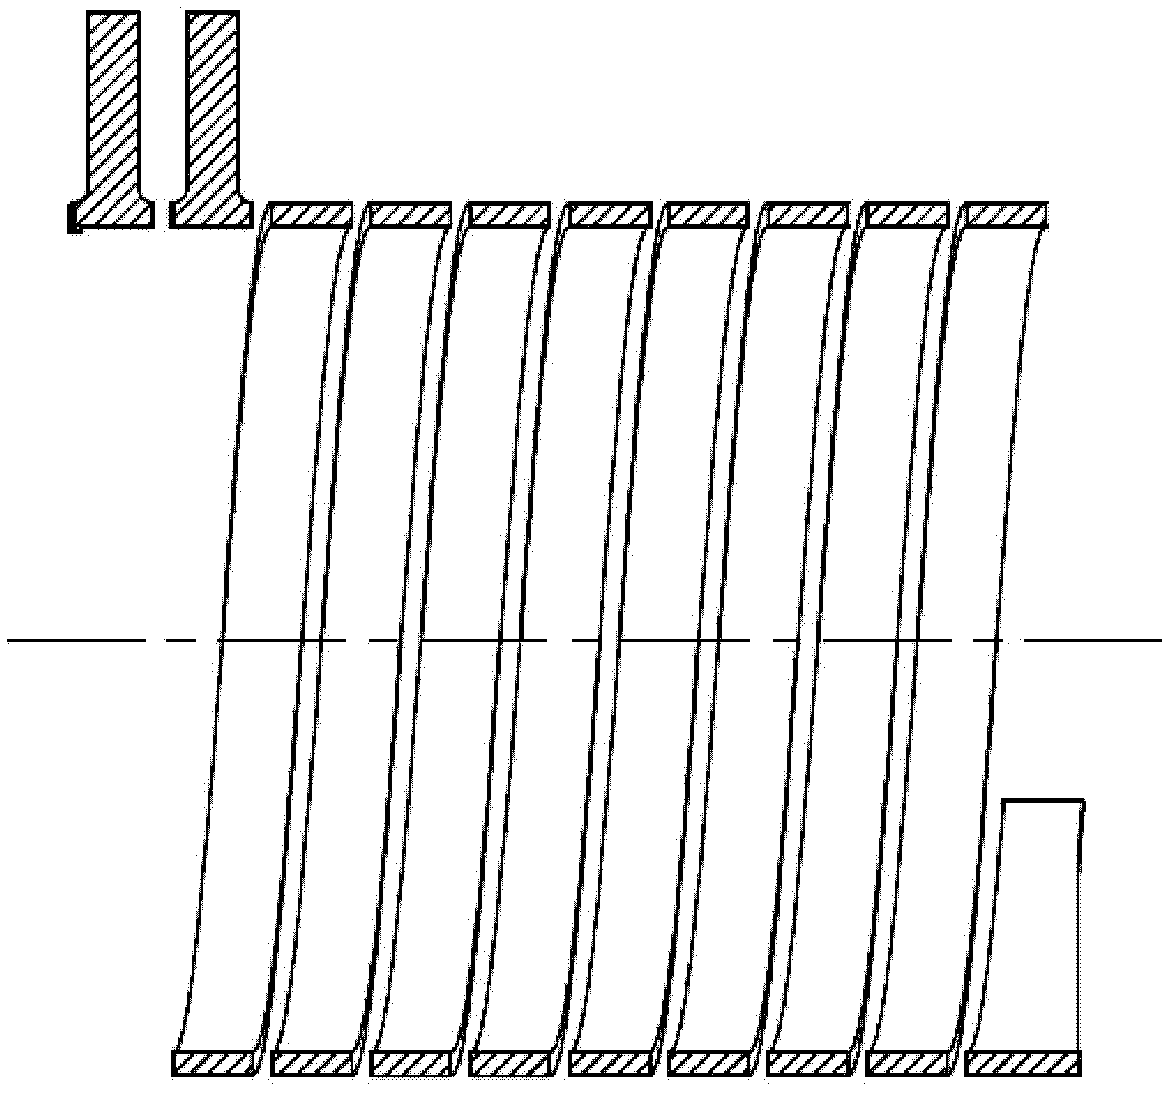 Spiral and axial circulating cooling water channel structure for motor